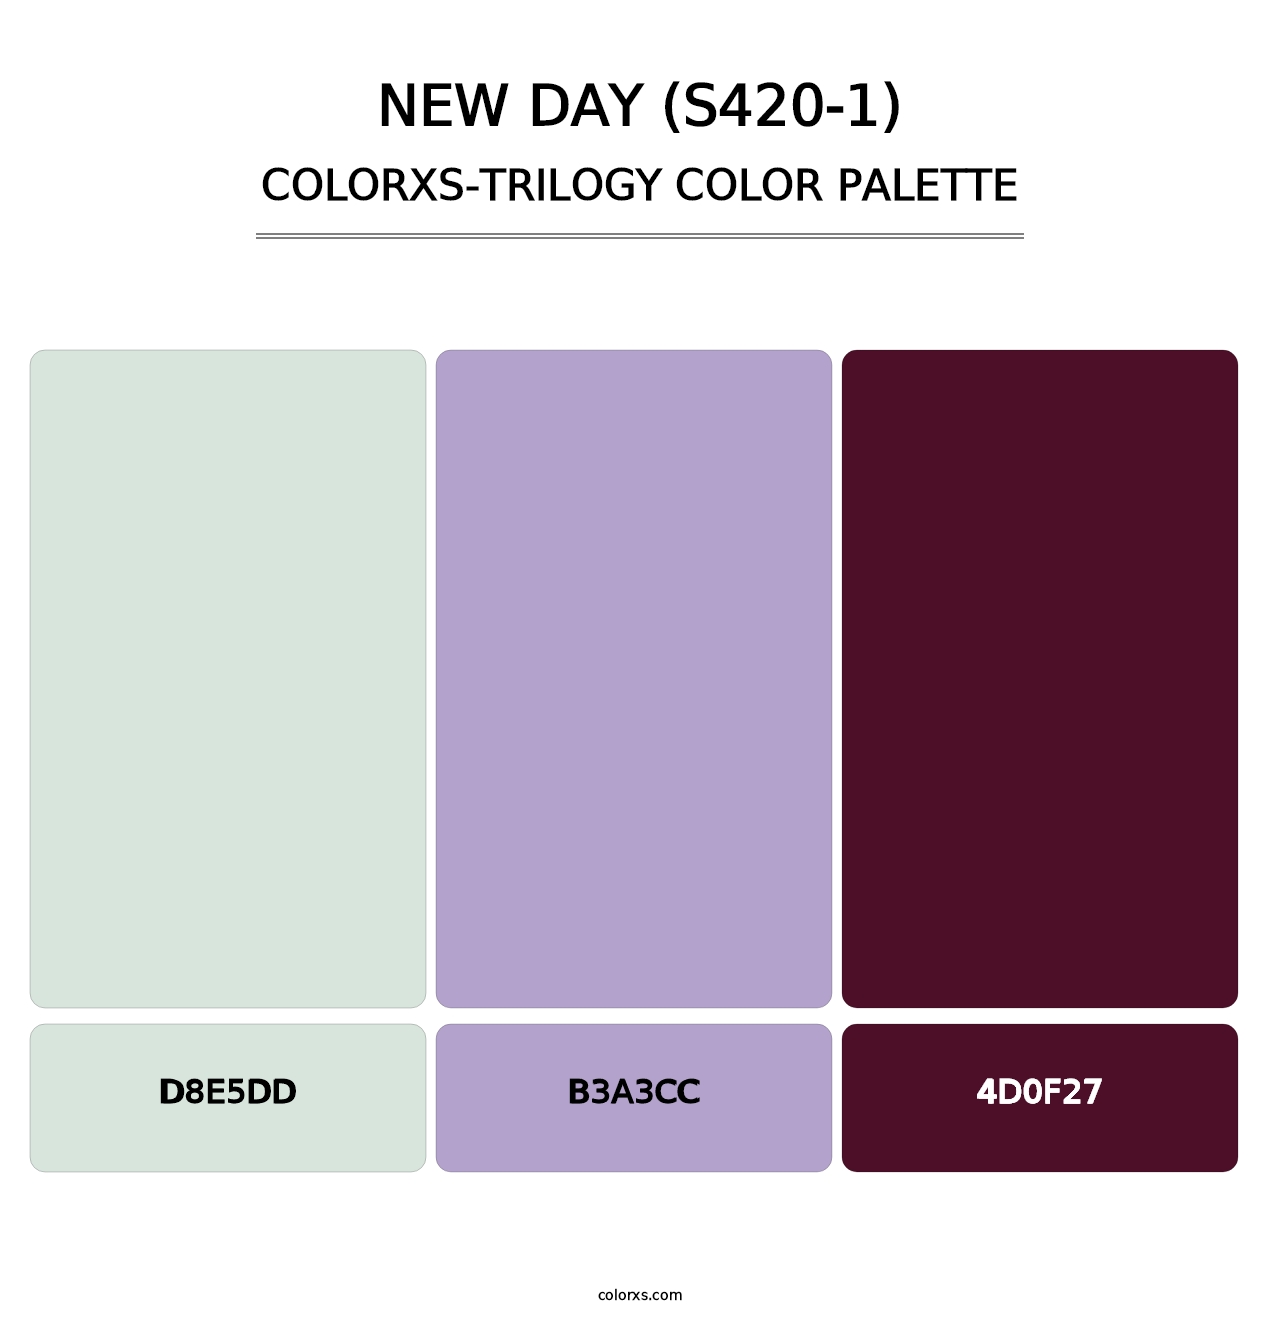 New Day (S420-1) - Colorxs Trilogy Palette